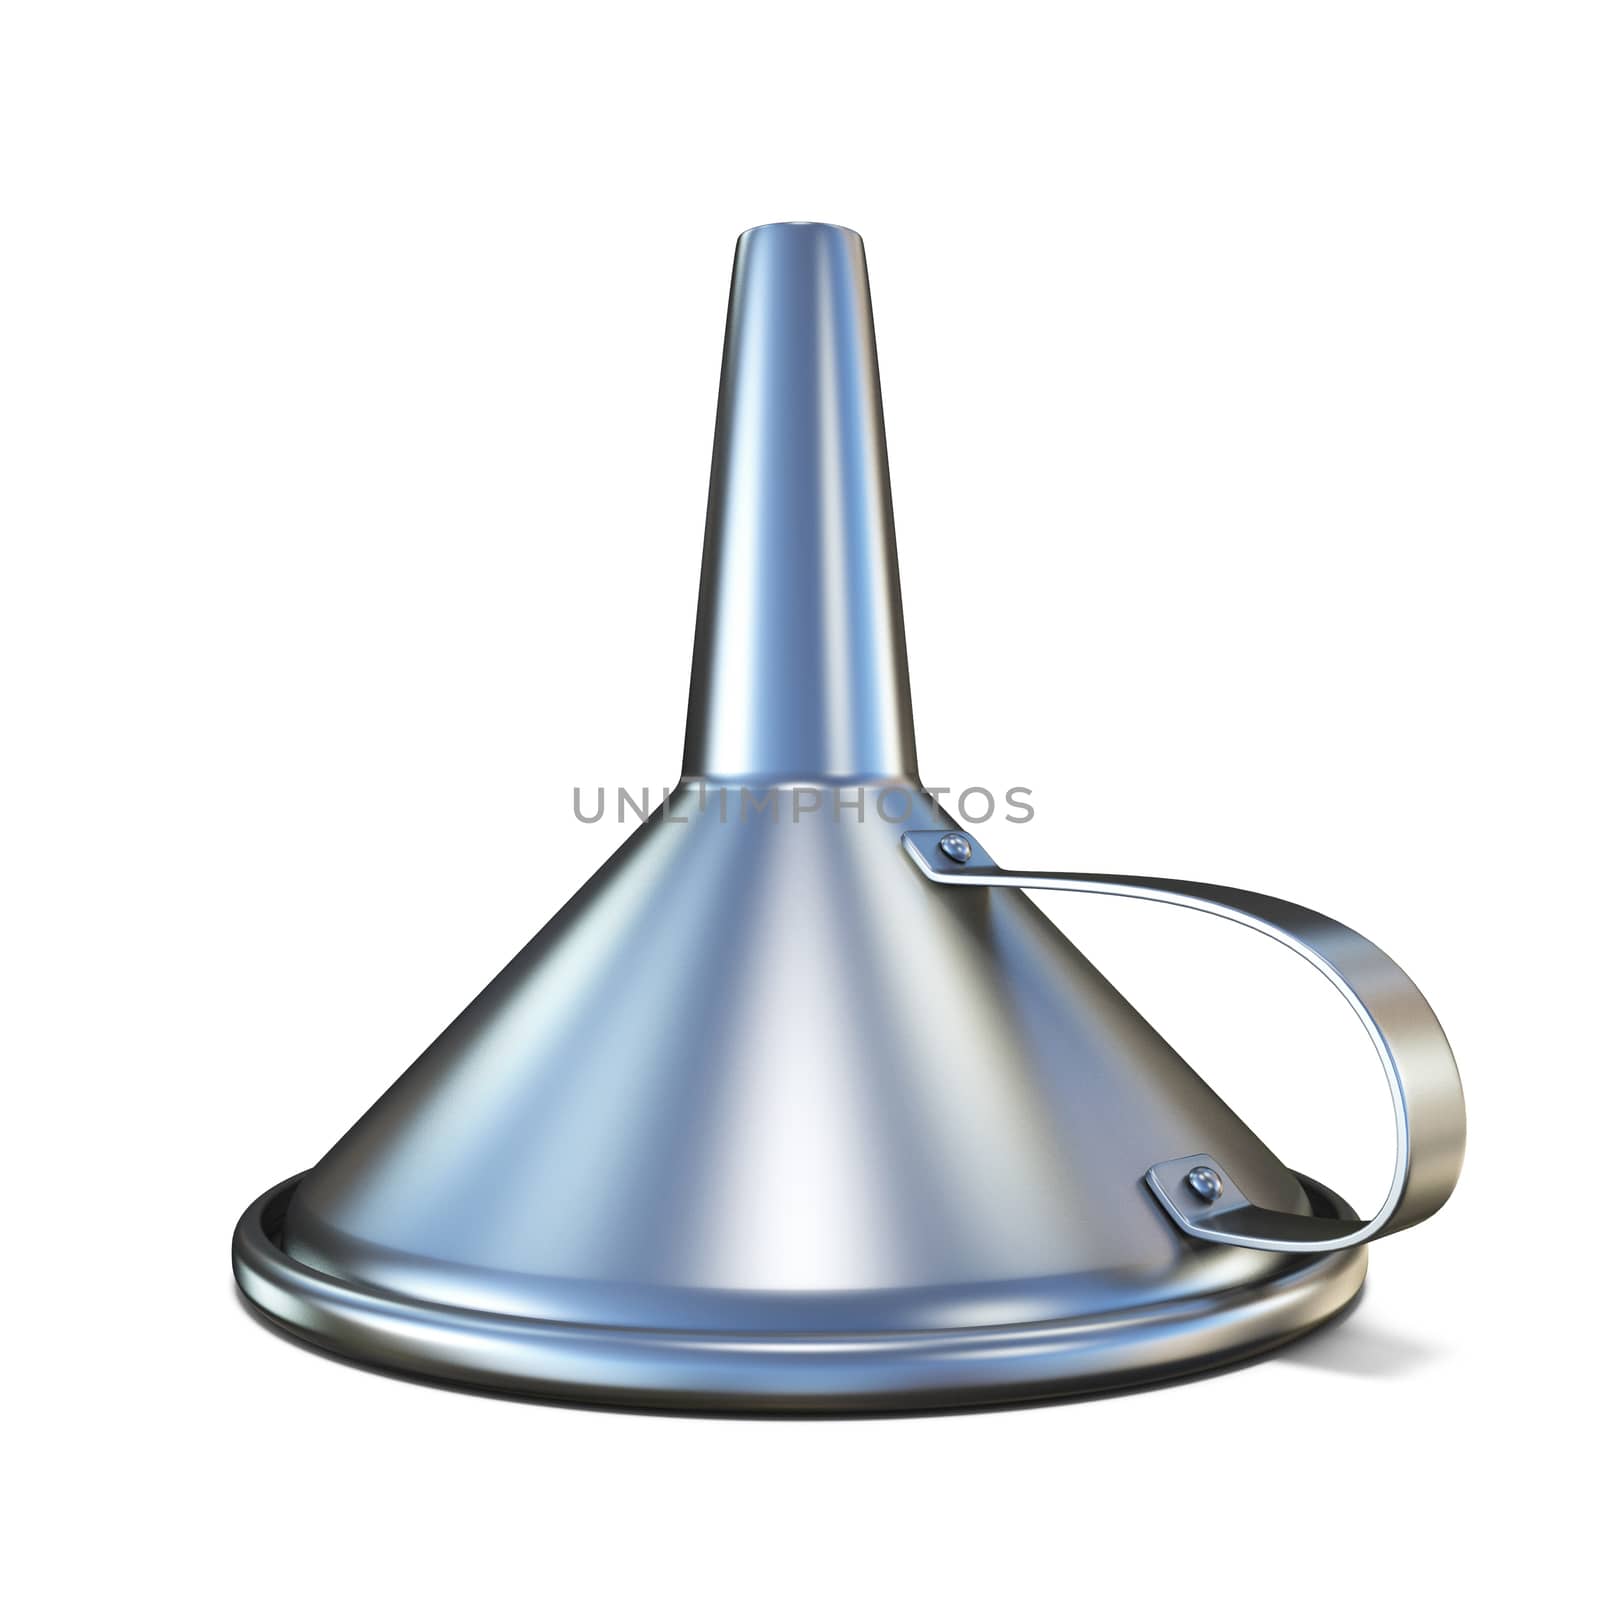 Metal funnel 3D rendering illustration isolated on white background